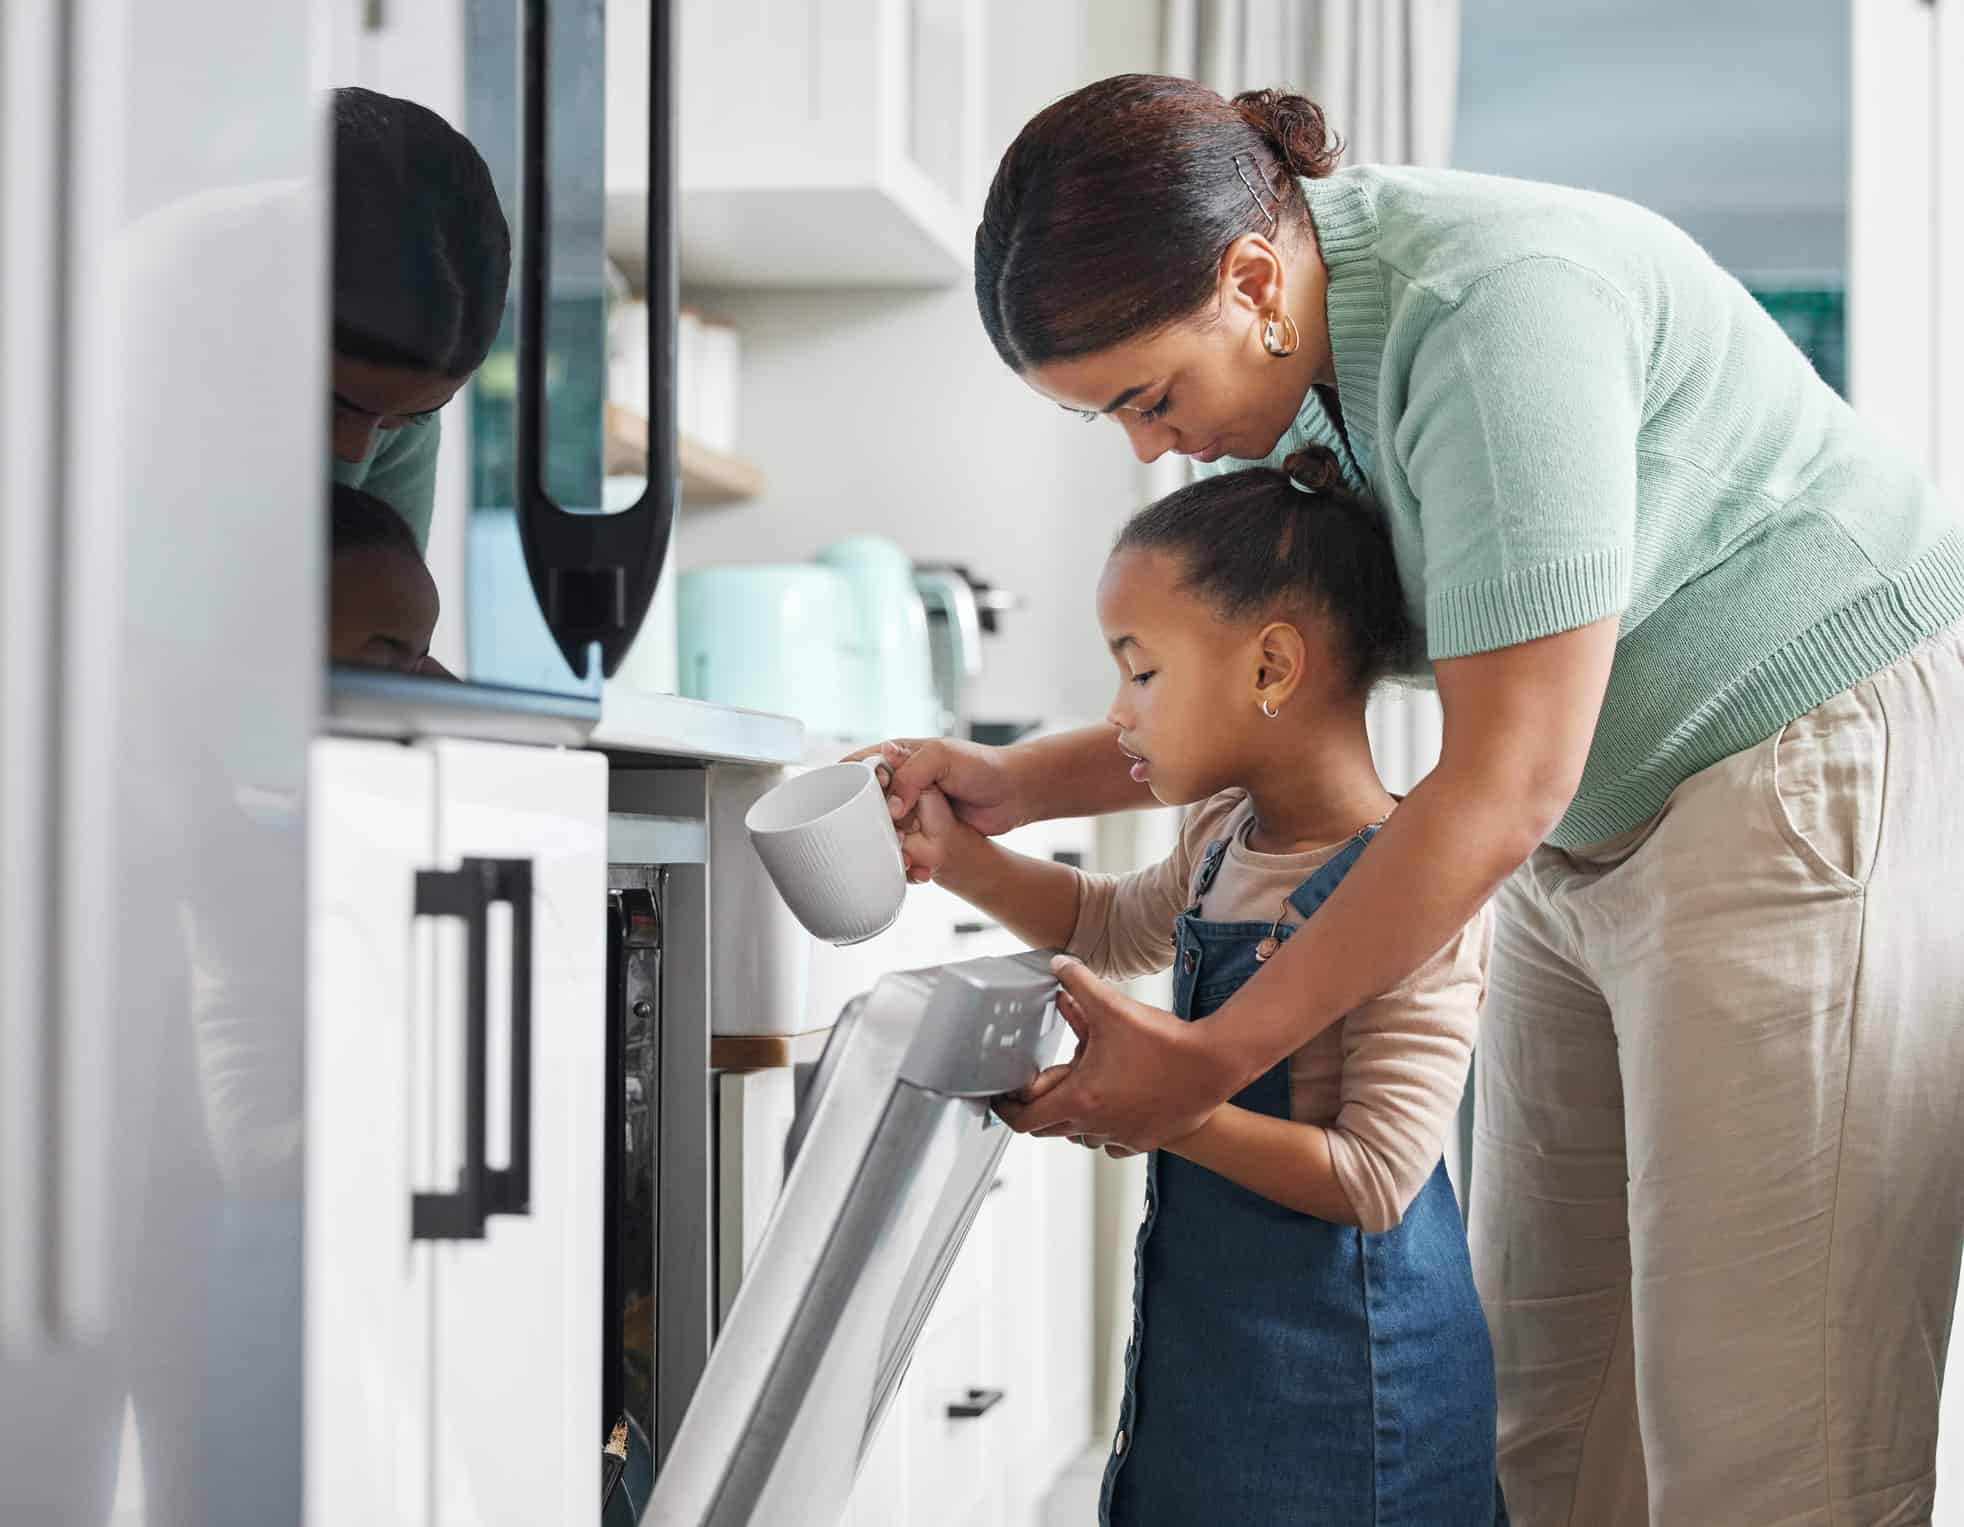 Shot of a little girl putting a cup into the dishwashing machine at home with her mother